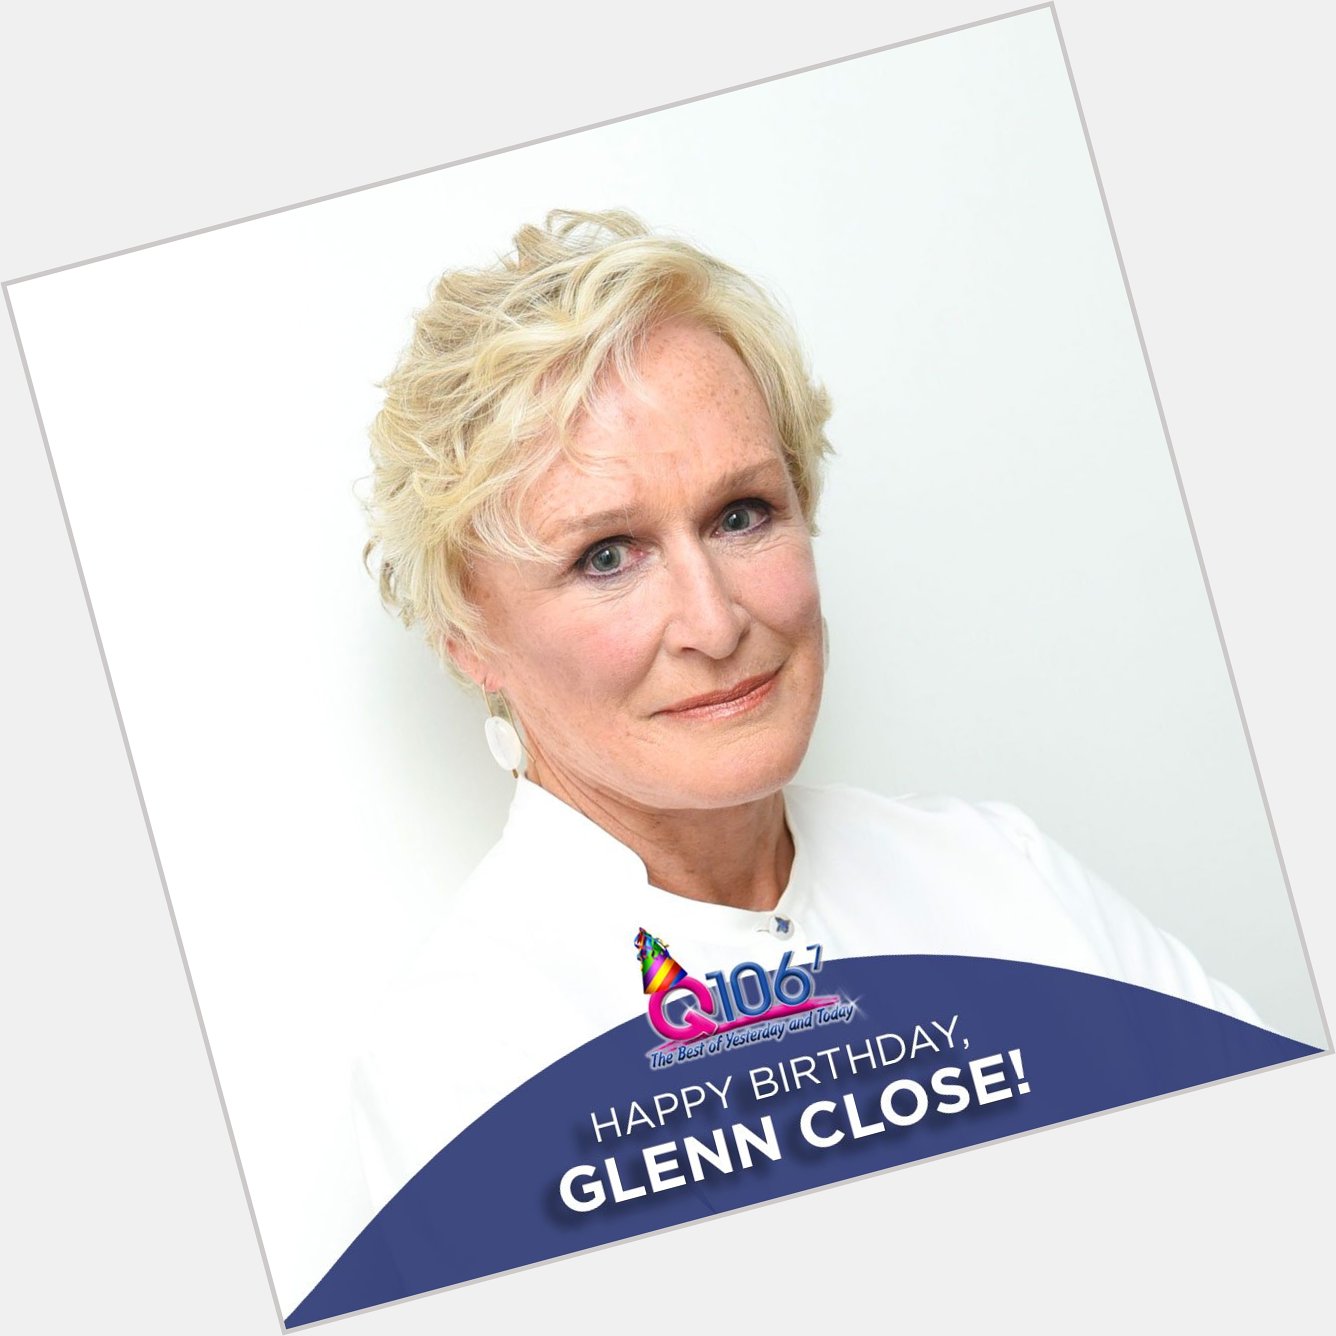 She may have been robbed of an Oscar, but she\s still a star! Happy Birthday, Glenn Close! 